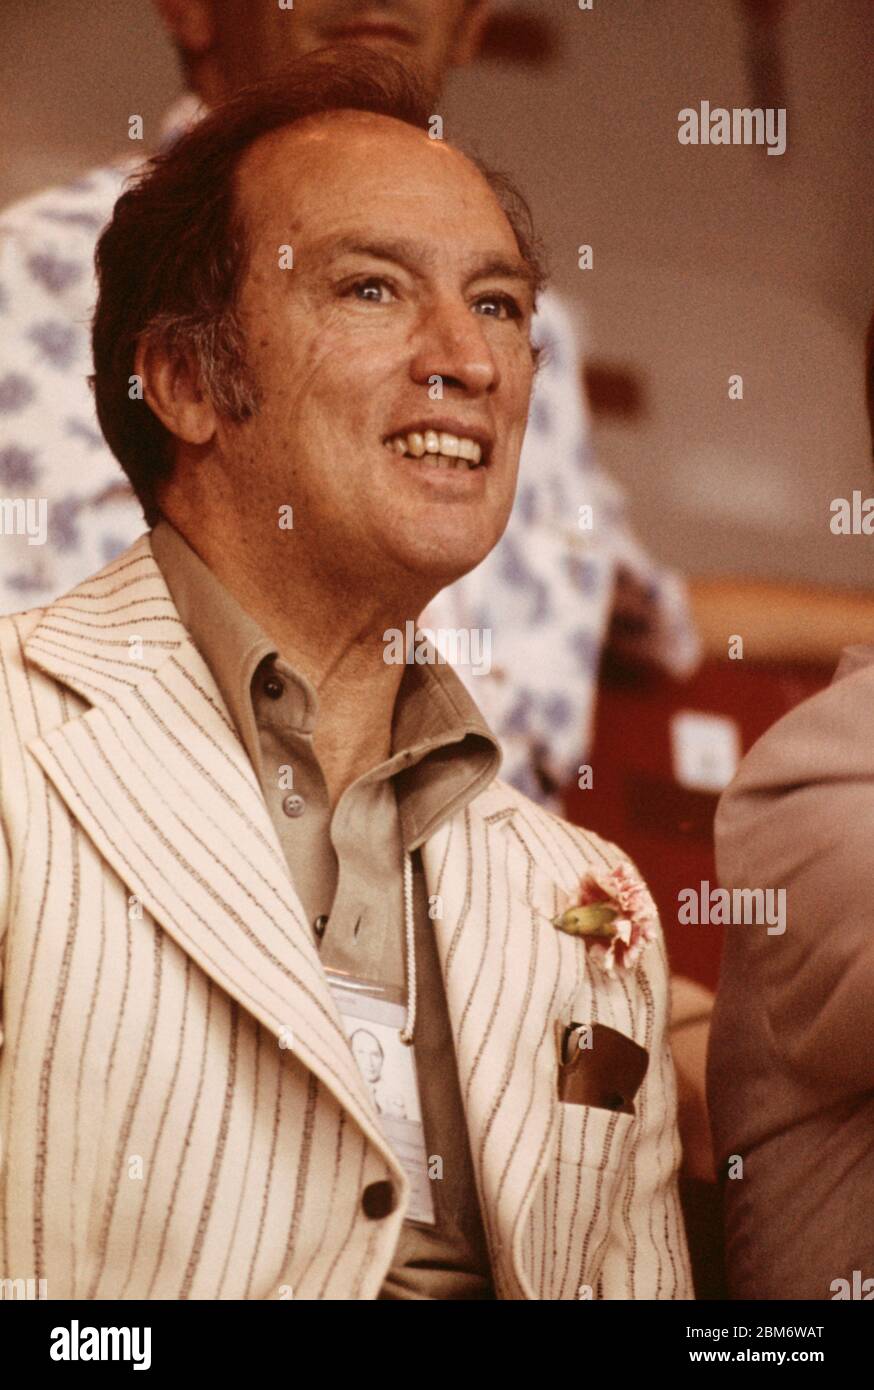 Canada, Quebec, in 1976 at the Montreal Olympics, , Former Prime Minister of Canada, Pierre Elliot Trudeau smiling, close-up Stock Photo